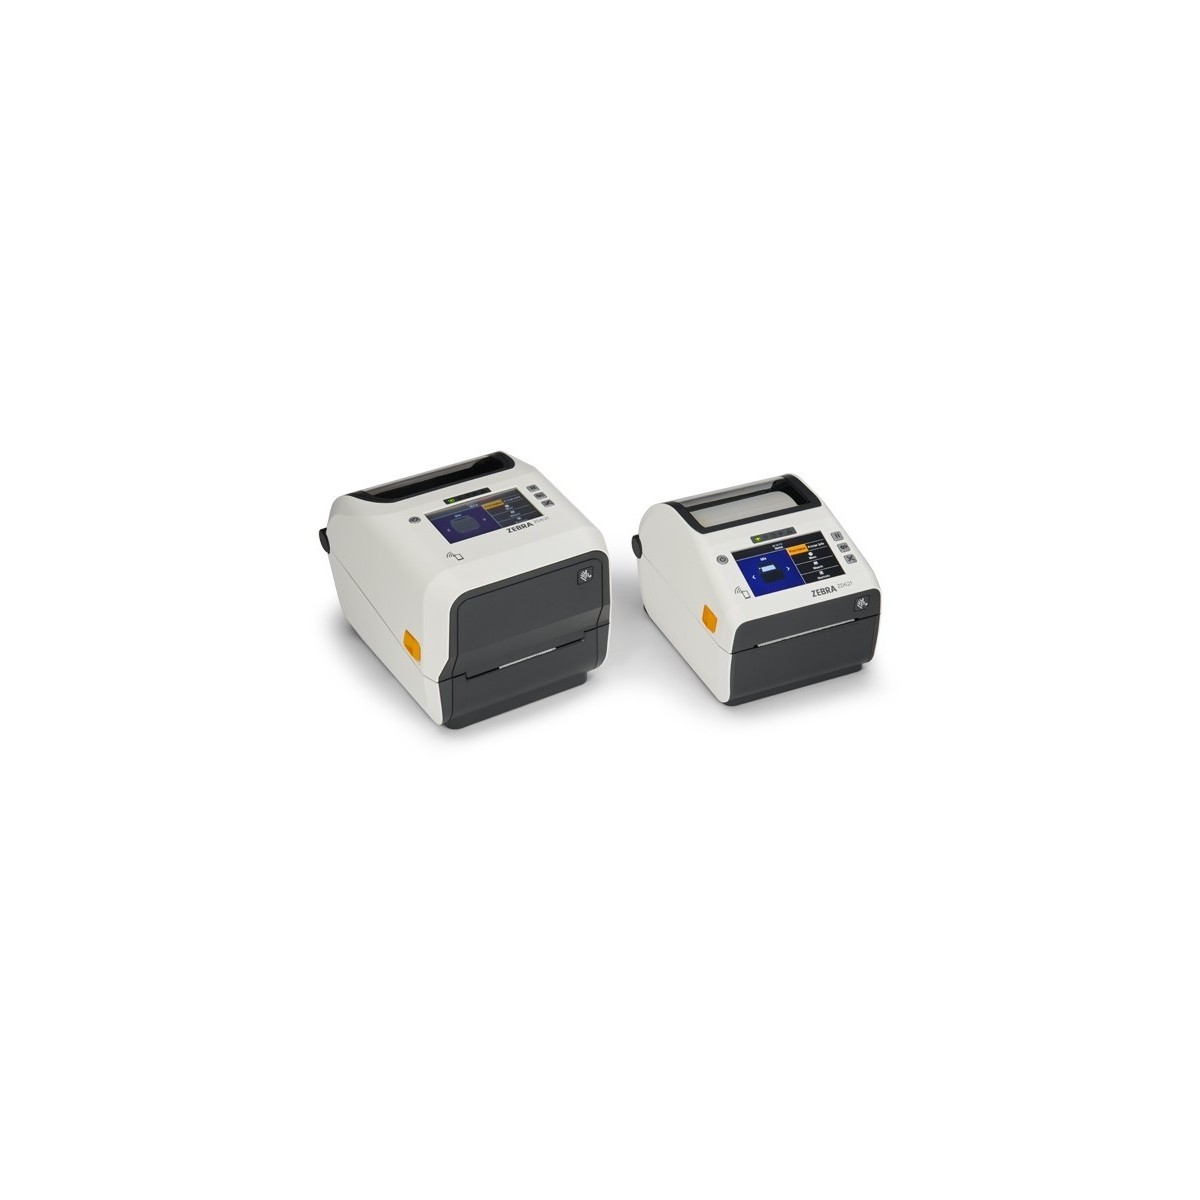 Direct Thermal Printer ZD621 Healthcare, Color Touch LCD 203 dpi, USB, USB Host, Ethernet, Serial, 802.11ac, BT4, ROW, EU and UK